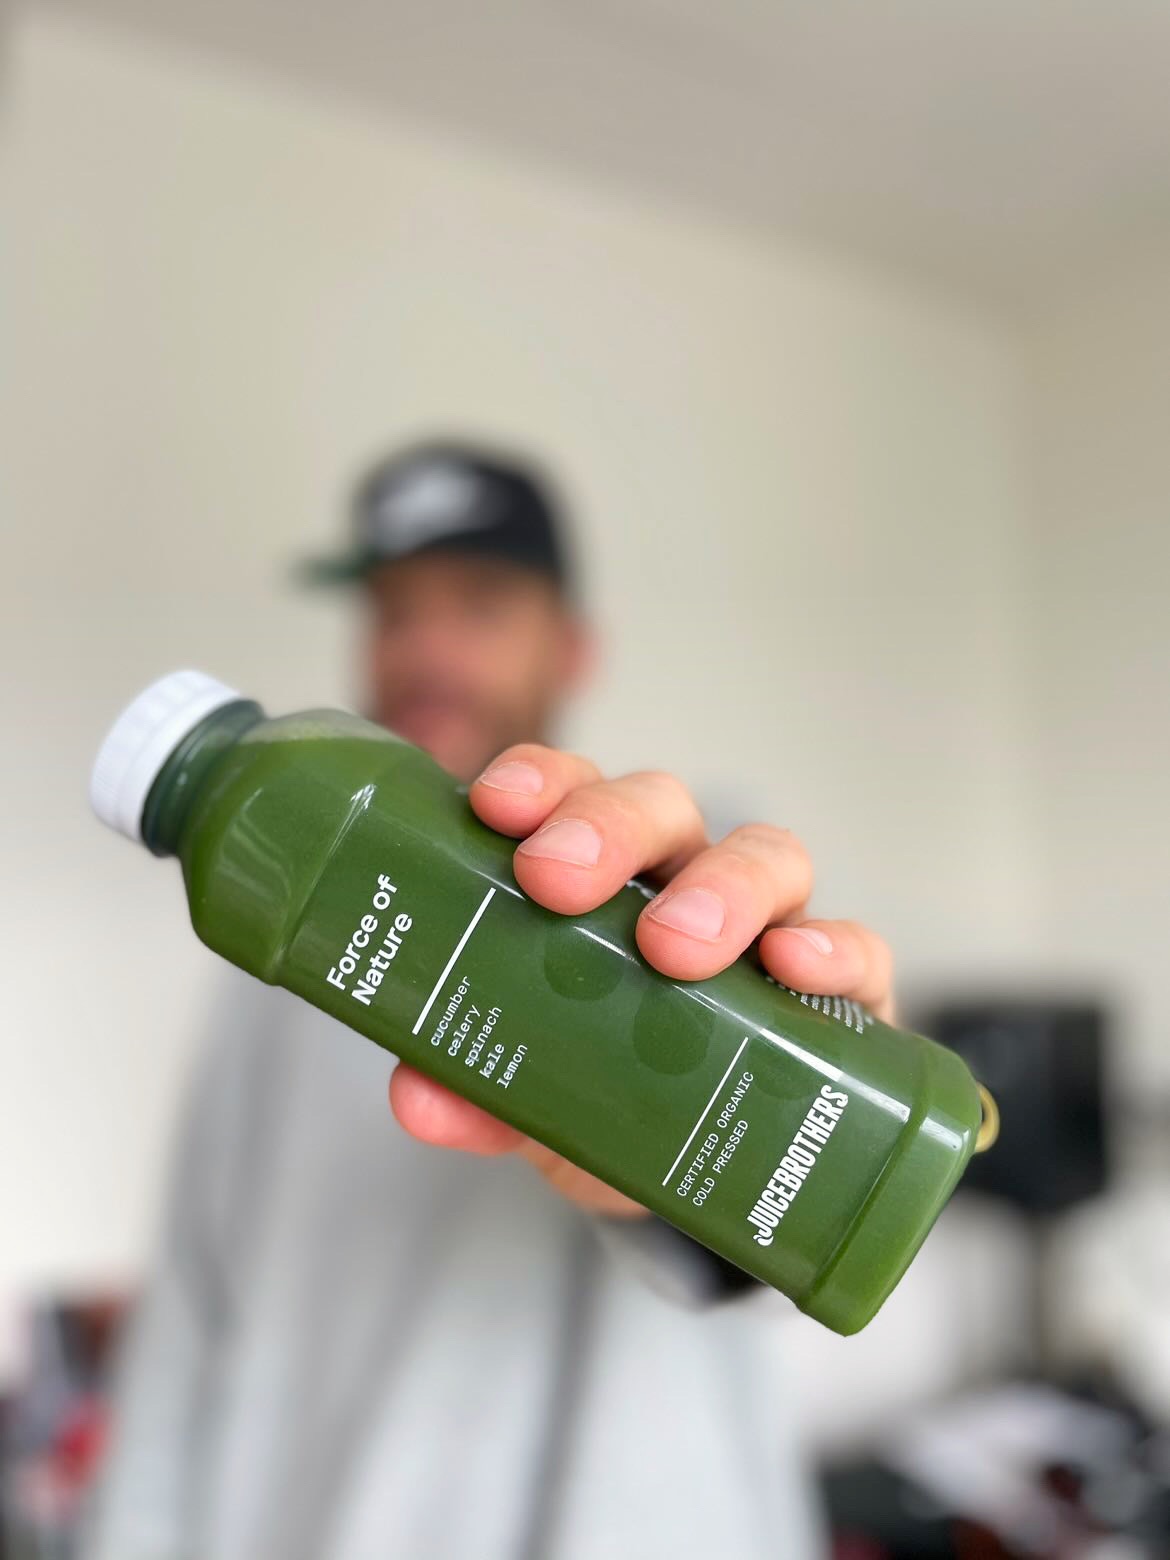 Juicebrothers review - Really delicious juices!